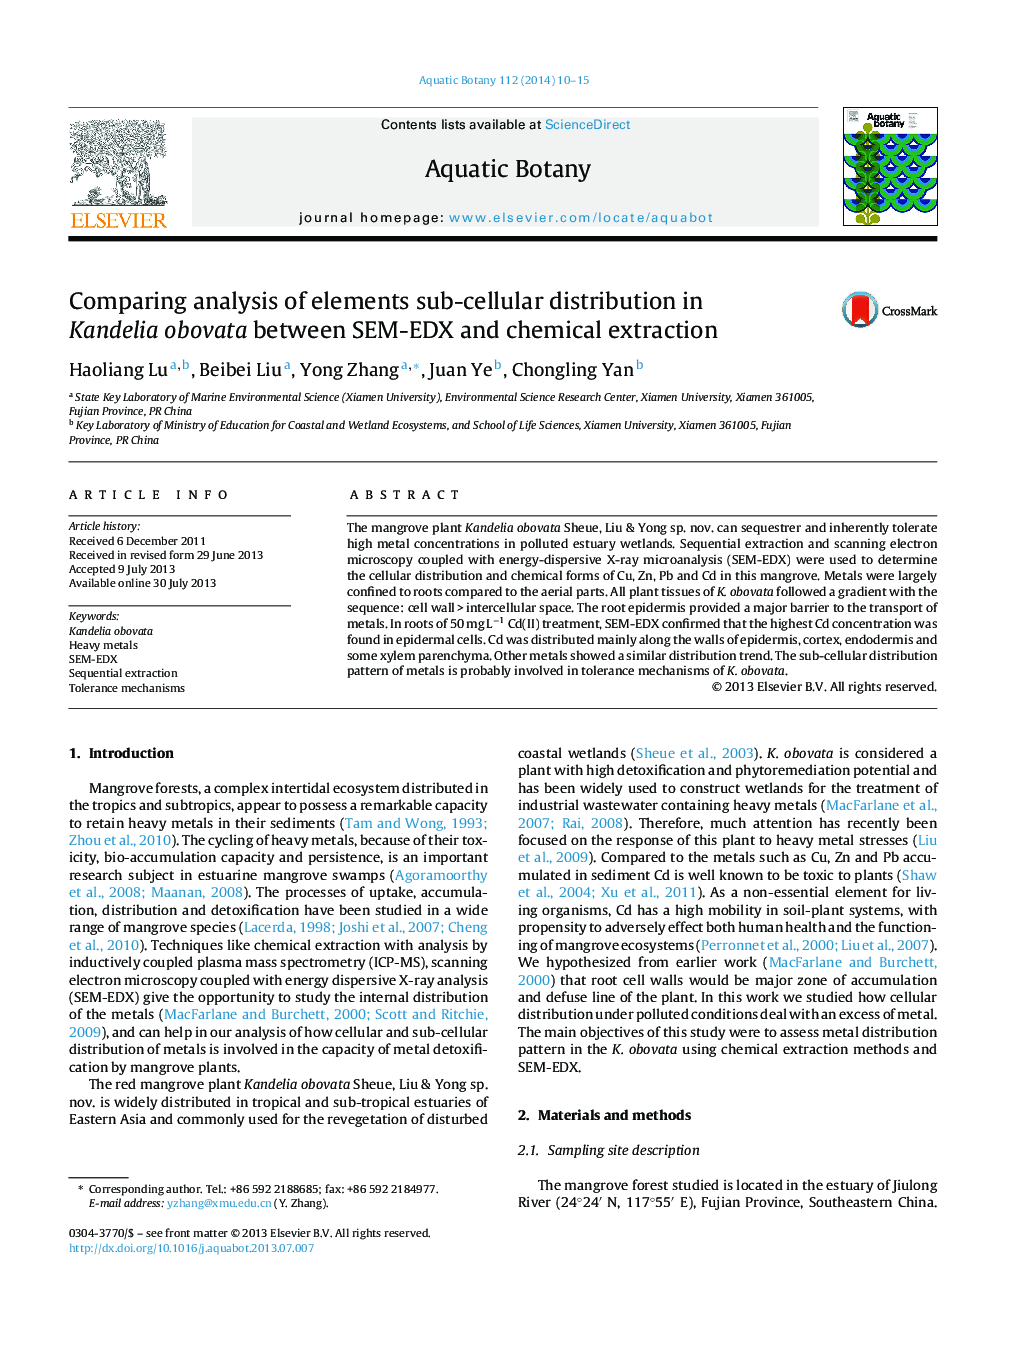 Comparing analysis of elements sub-cellular distribution in Kandelia obovata between SEM-EDX and chemical extraction